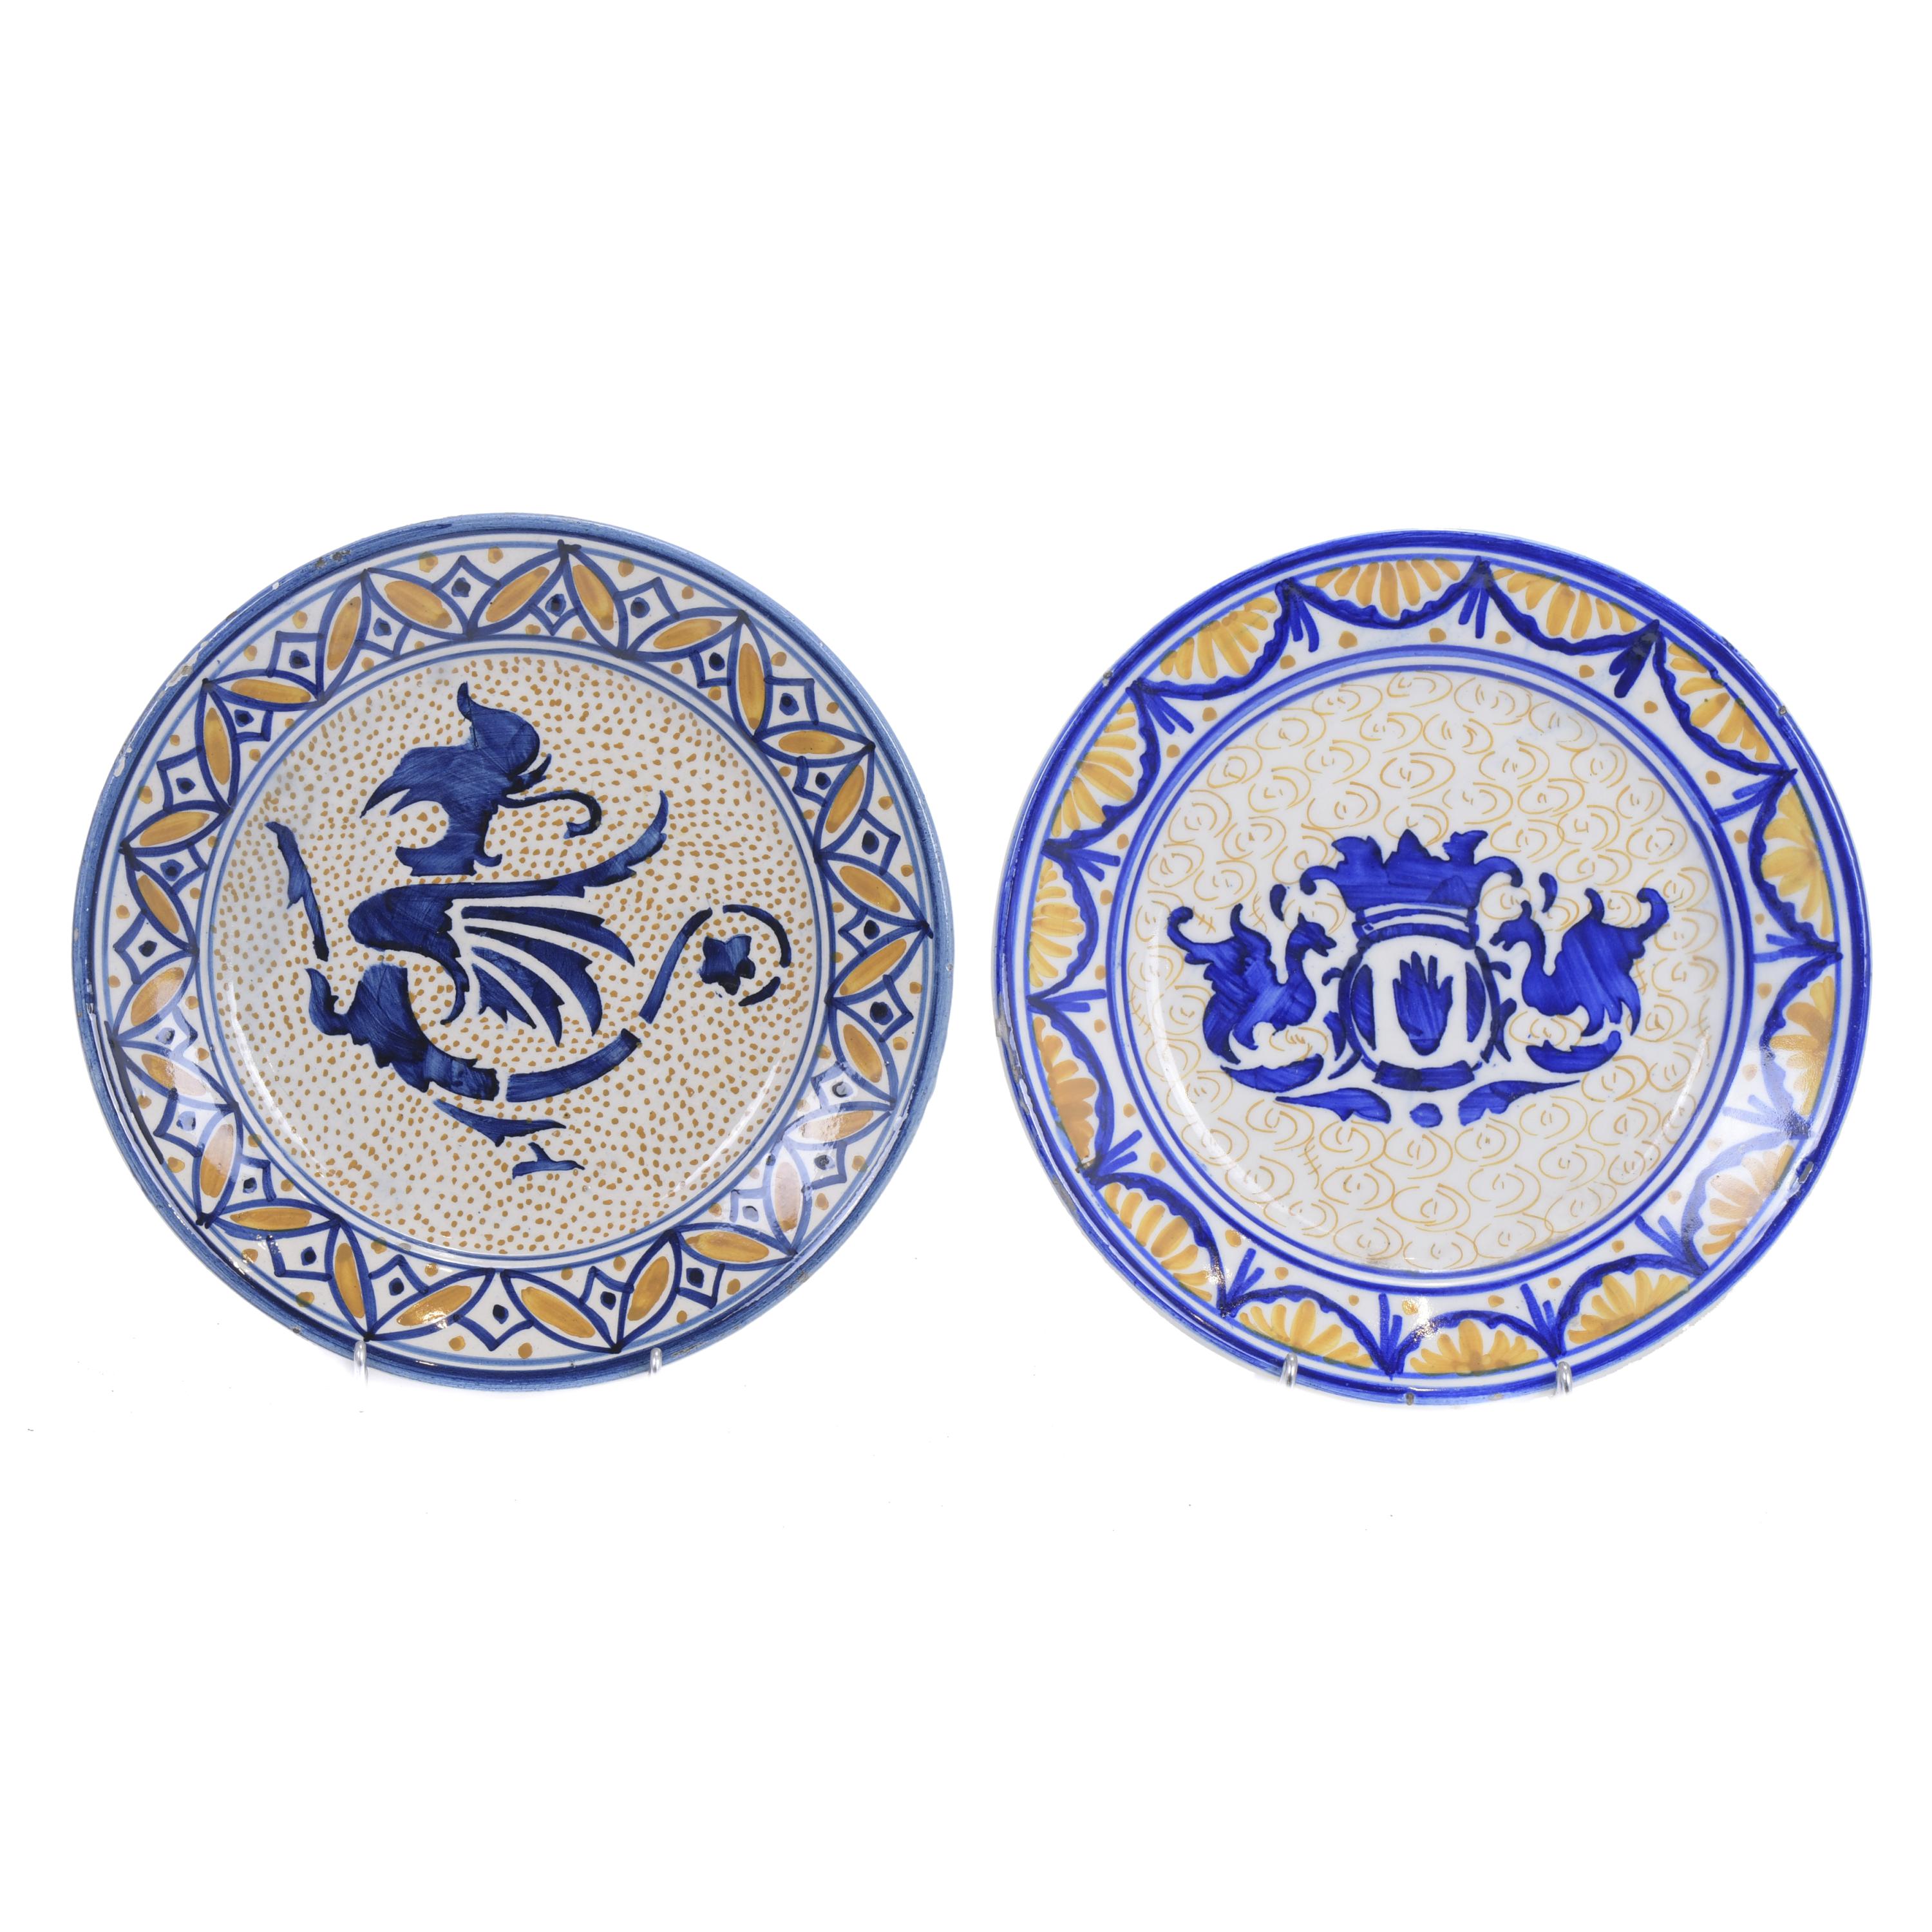 PAIR OF VALENCIAN DISHES, 20TH CENTURY. 